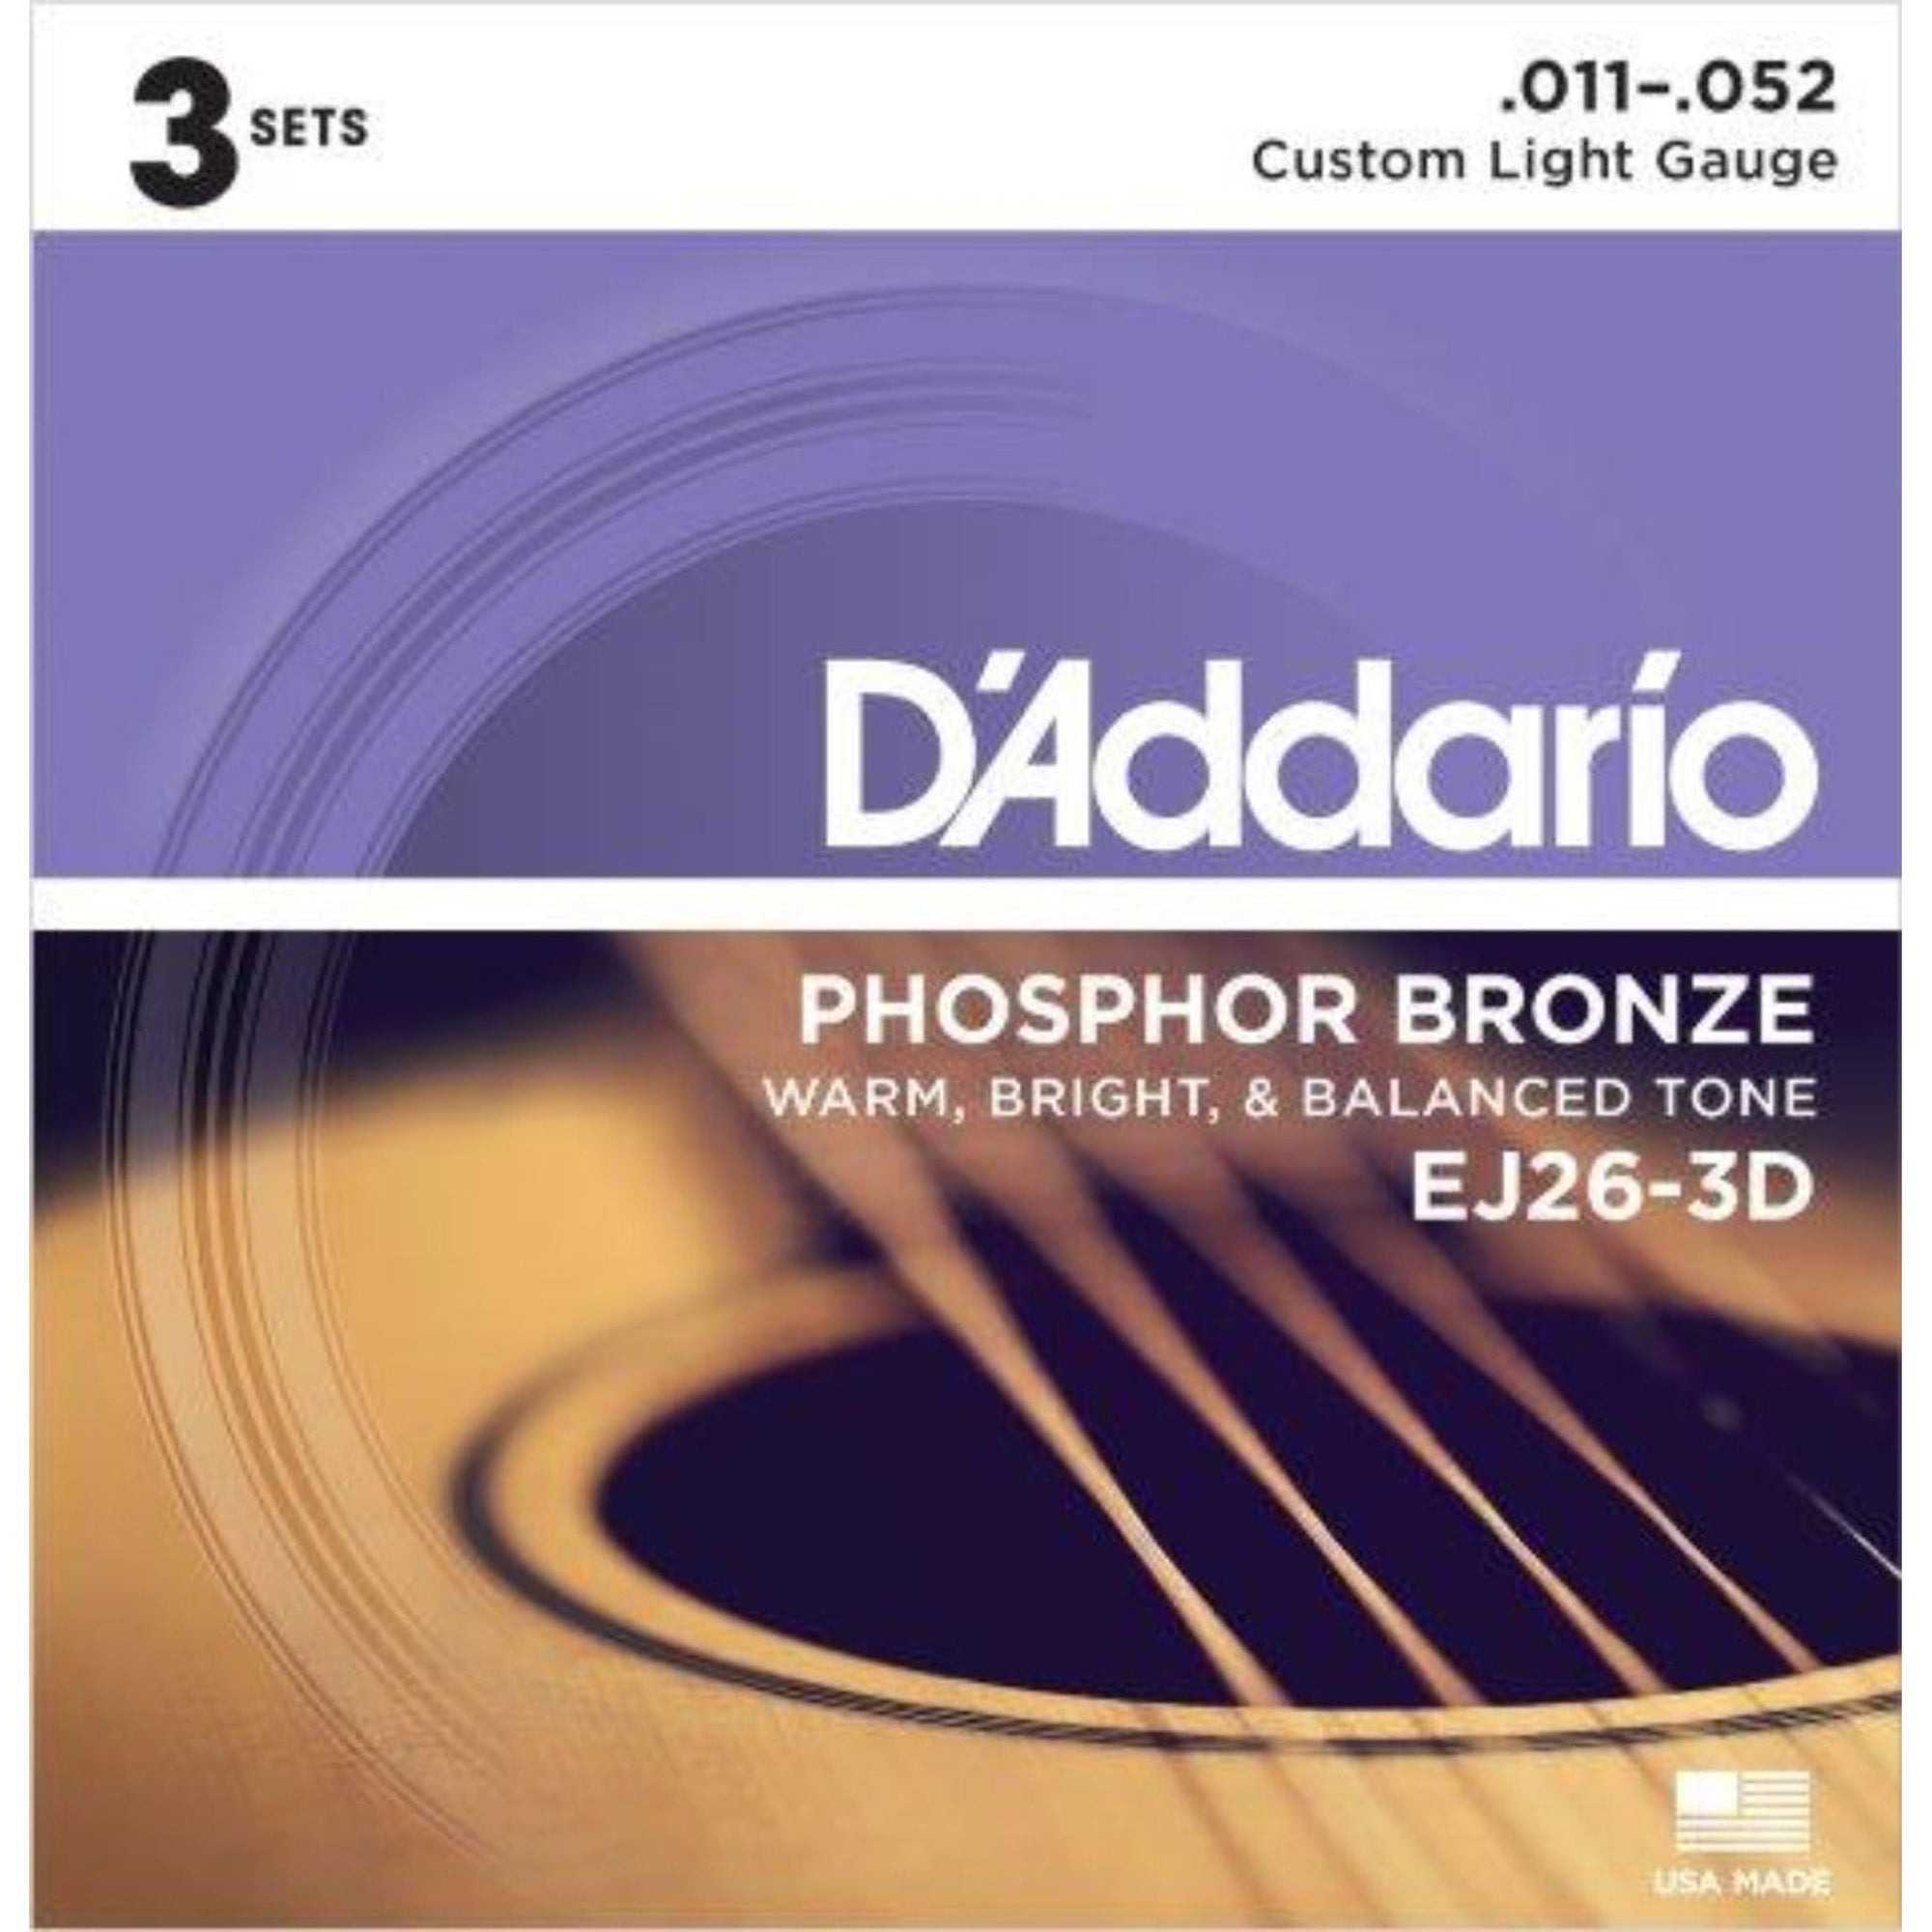 The D'Addario EJ26 Acoustic Guitar String Set, also Referred to as Custom Light, EJ26 strings are a D'Addario original hybrid gauge and a comfortable compromise for players who want the depth and projection of light gauge bottom strings, but slightly less tension on the high strings for easy bending. 